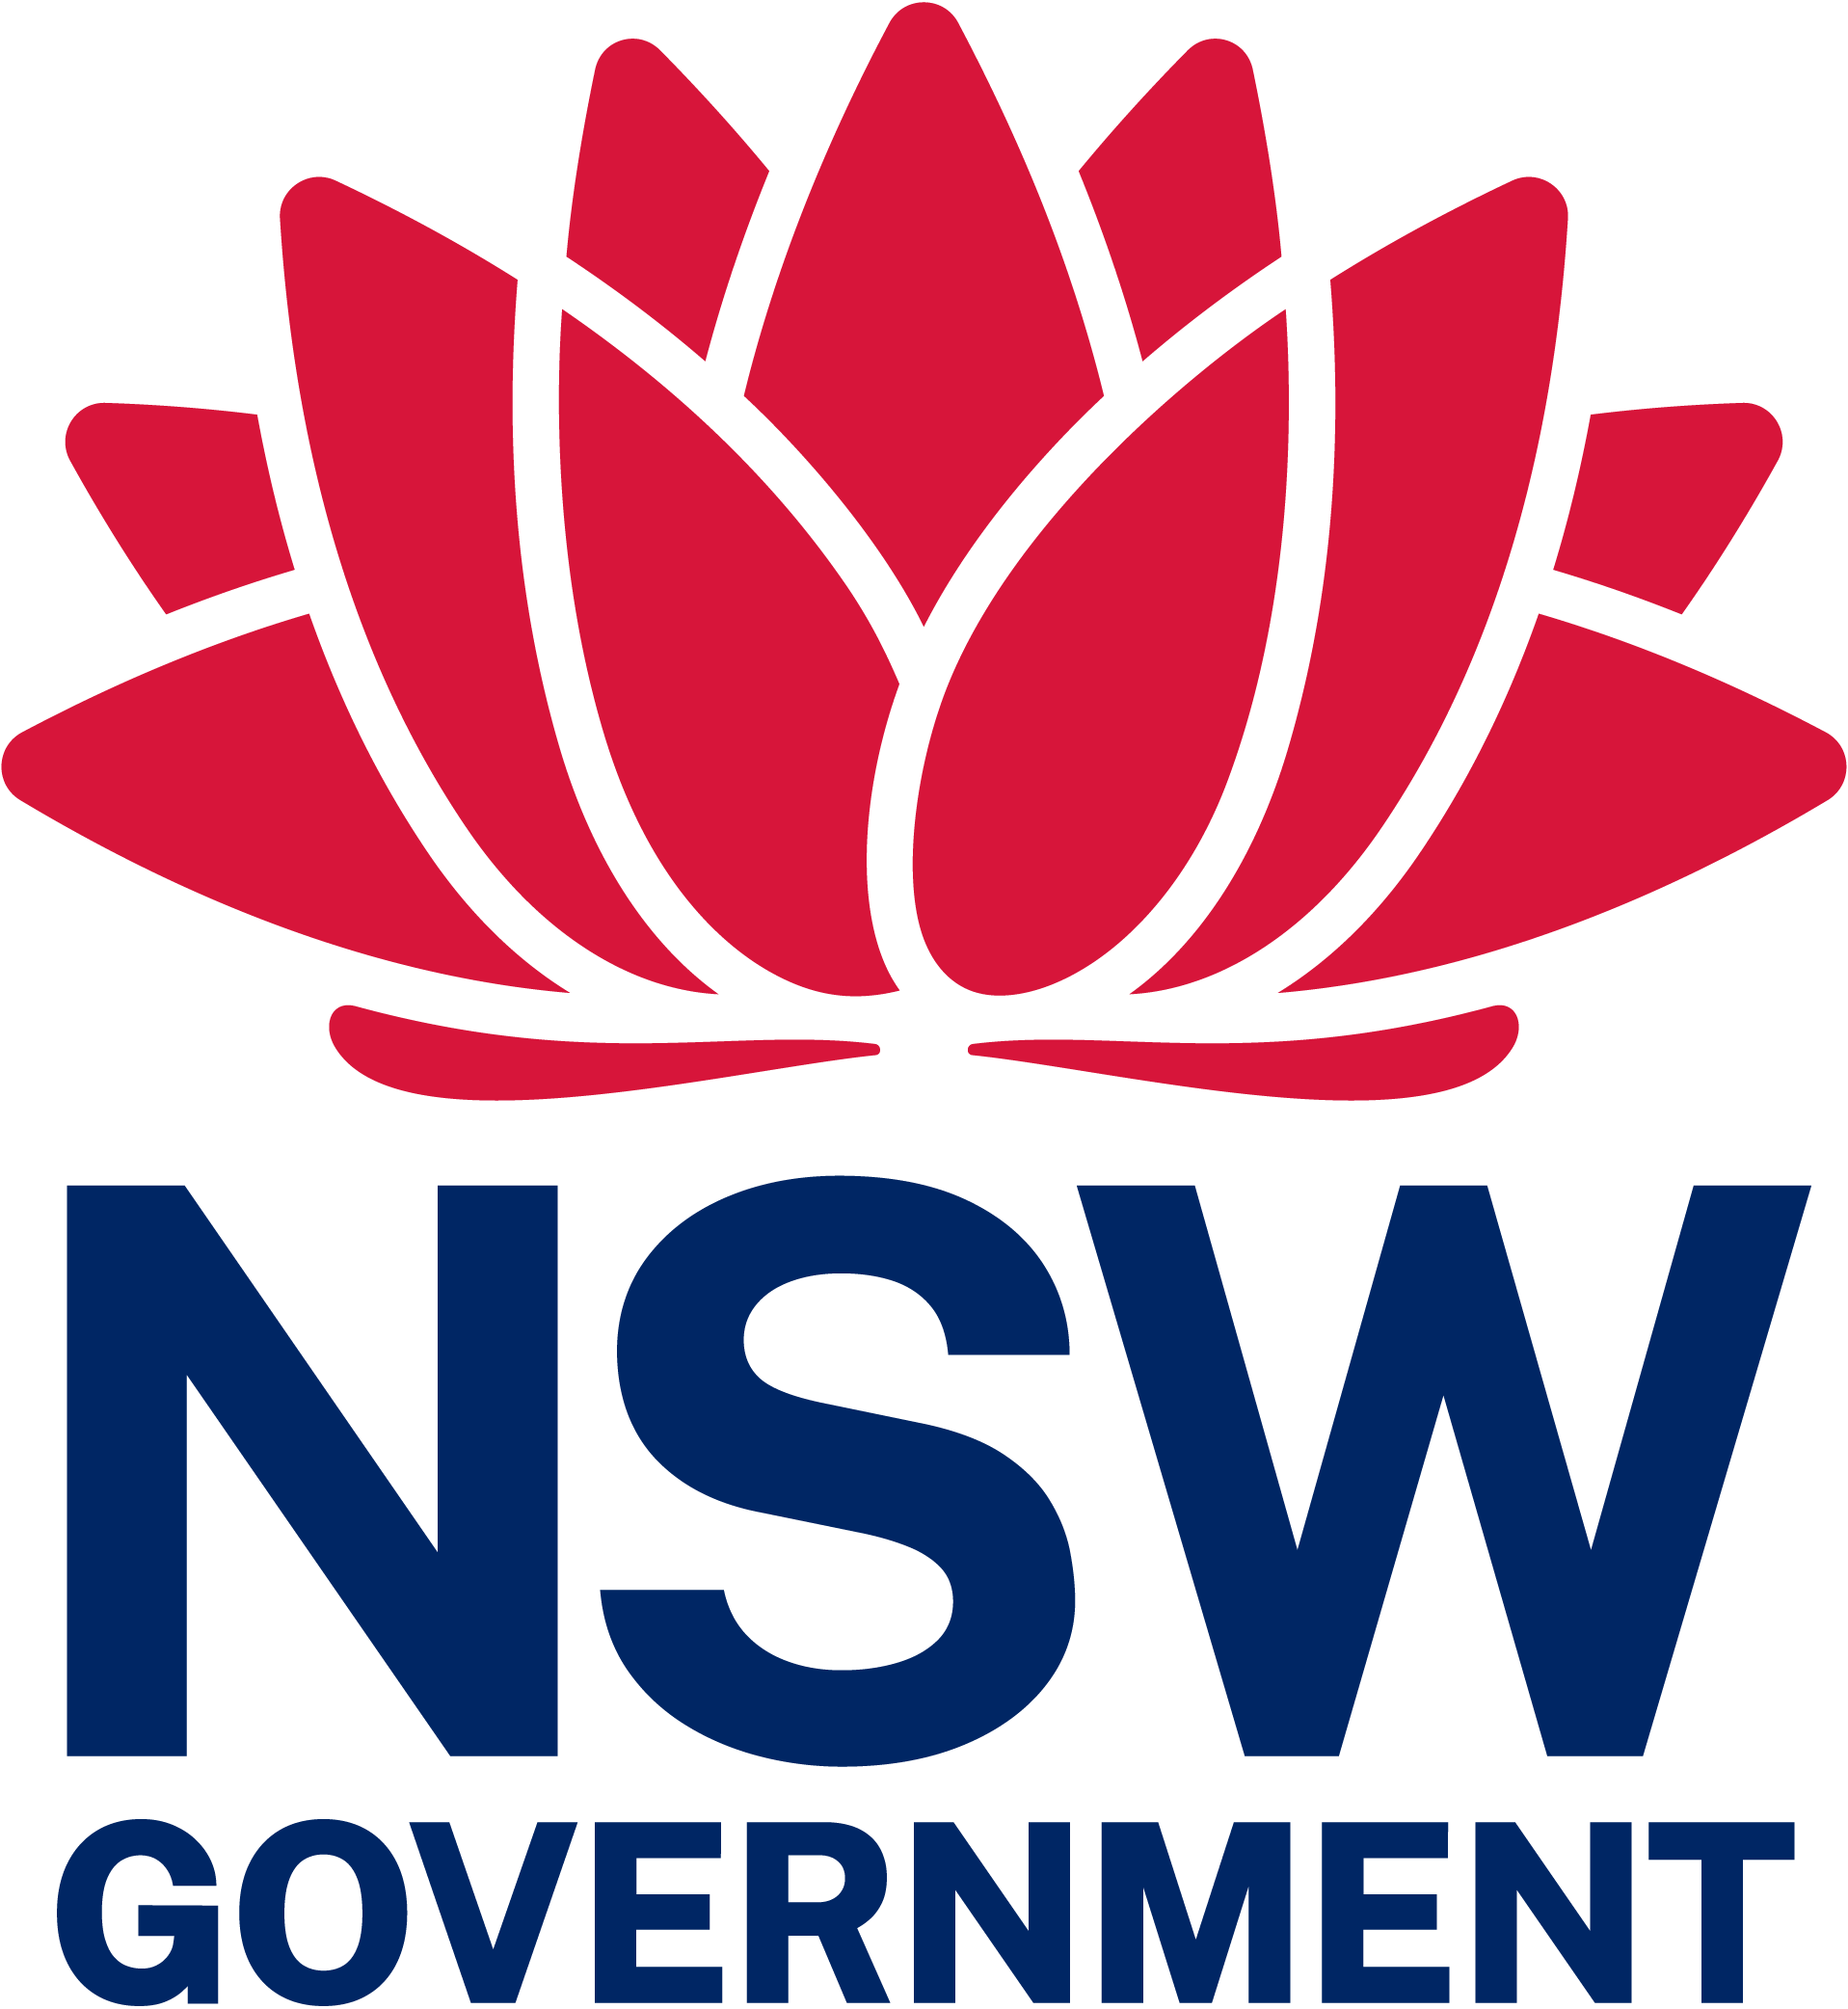 Simplified waratah flower in deep red colour with the words NSW Government in dark blue stacked underneath.